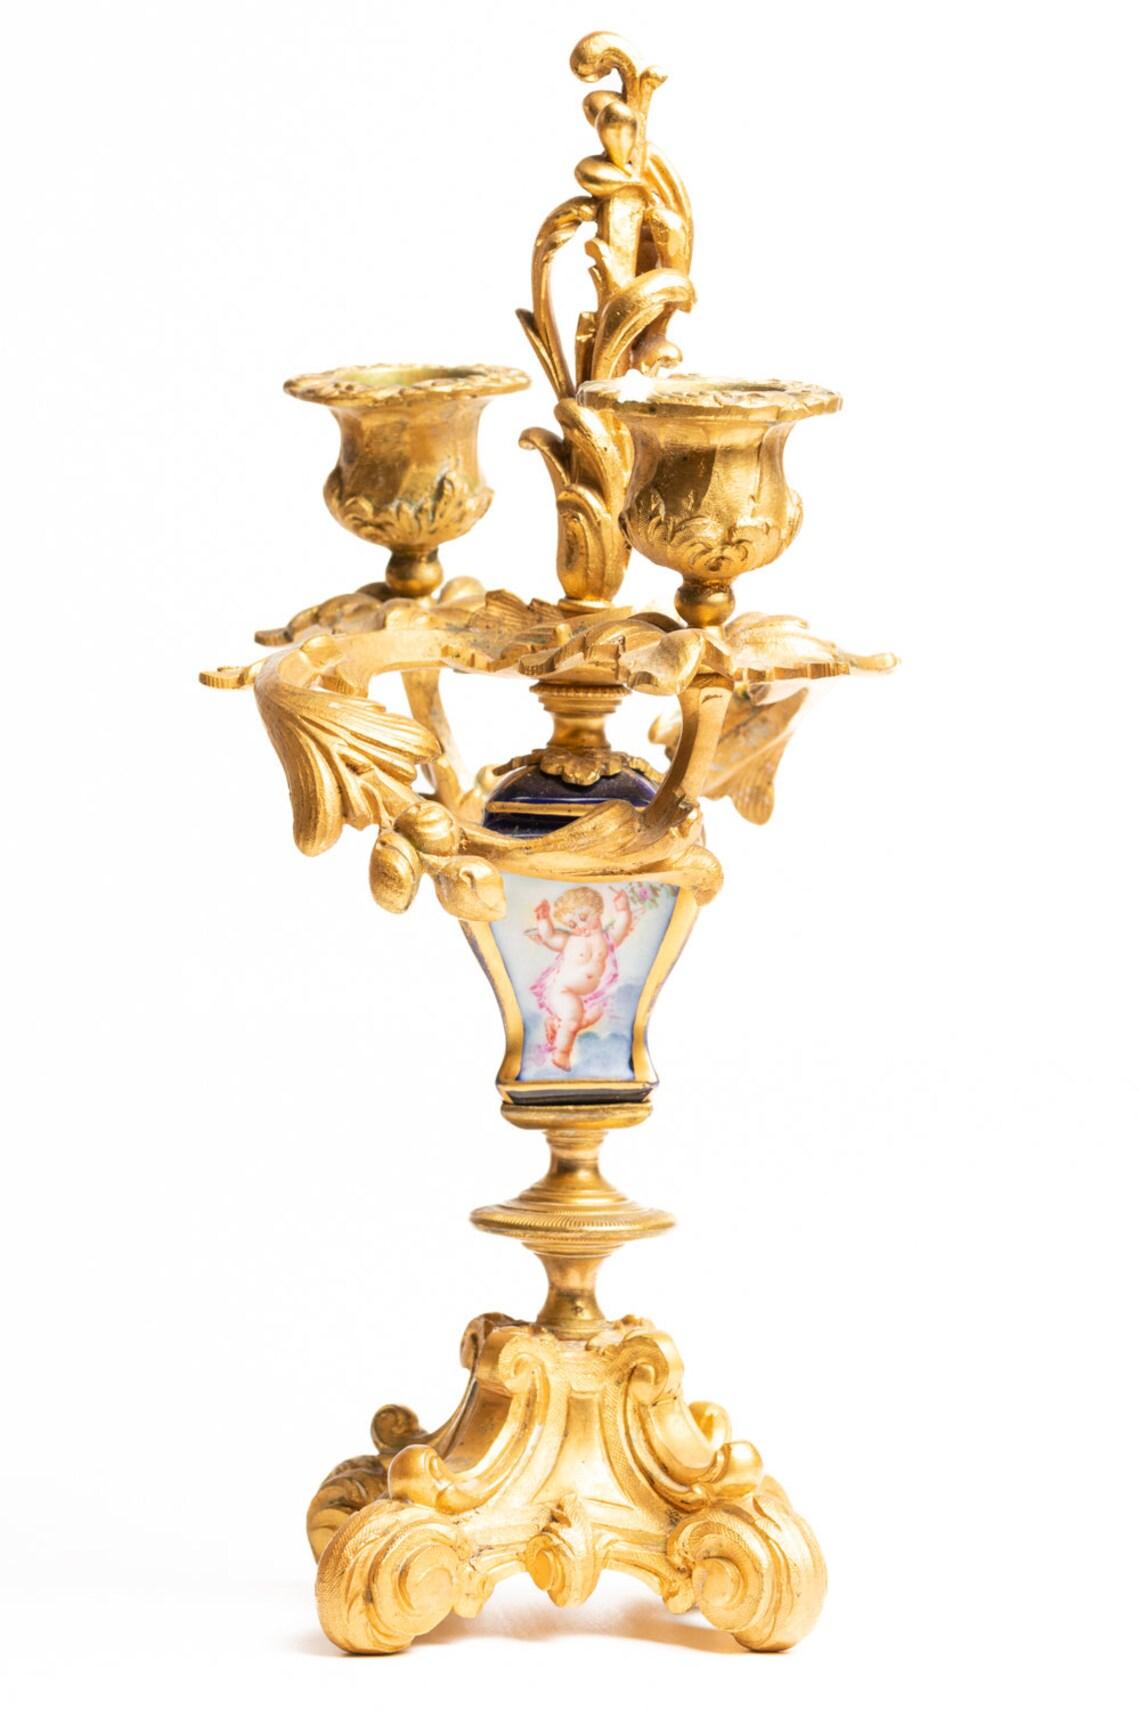 Antique 19th Century Bronze & Porcelain Candelabra In Good Condition For Sale In Portland, England